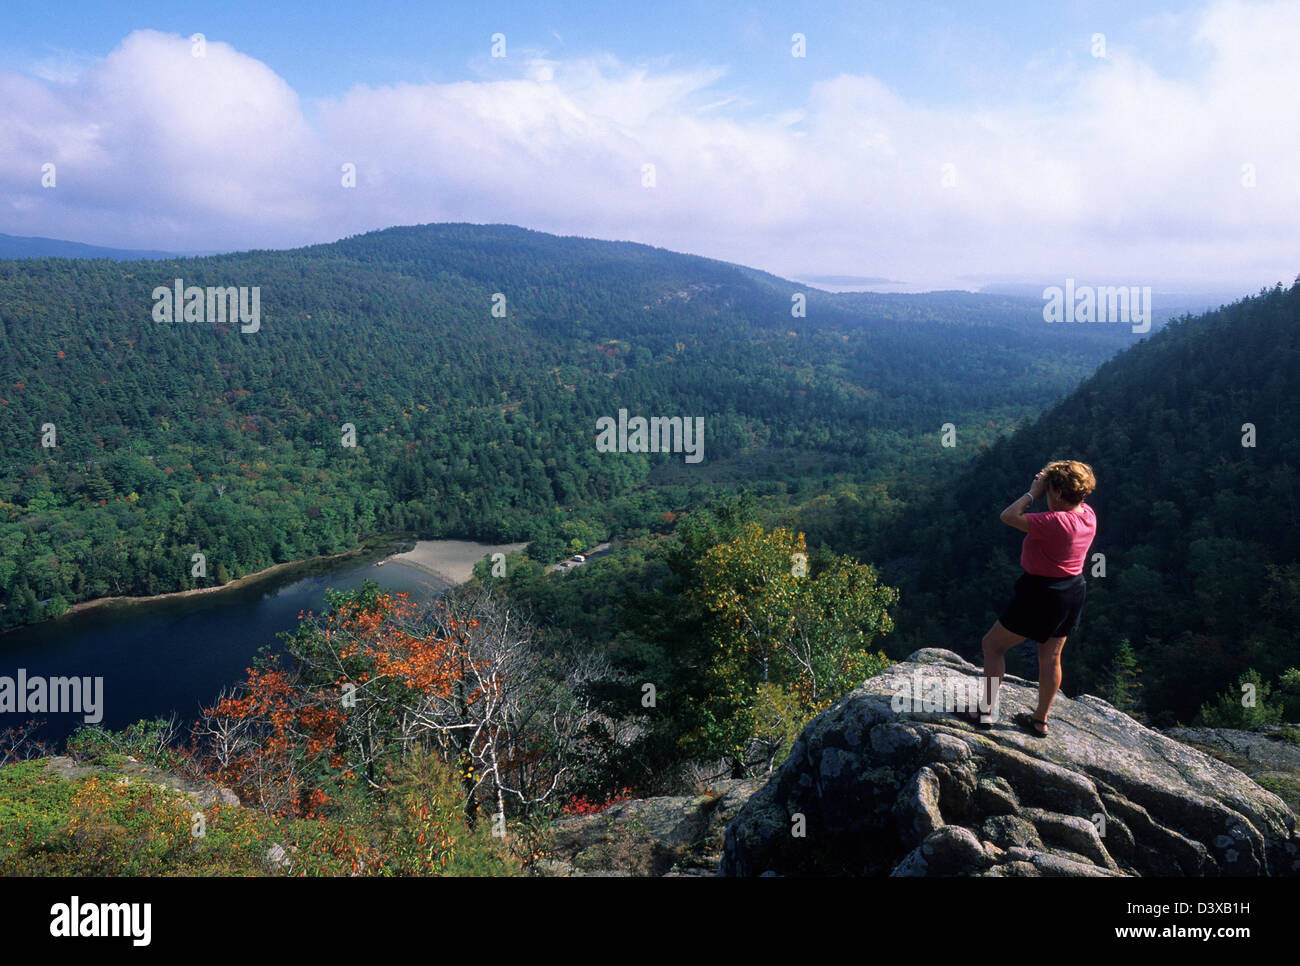 Elk282-2286 Maine, Acadia National Park, Echo Lake from Beech Mt with woman Stock Photo